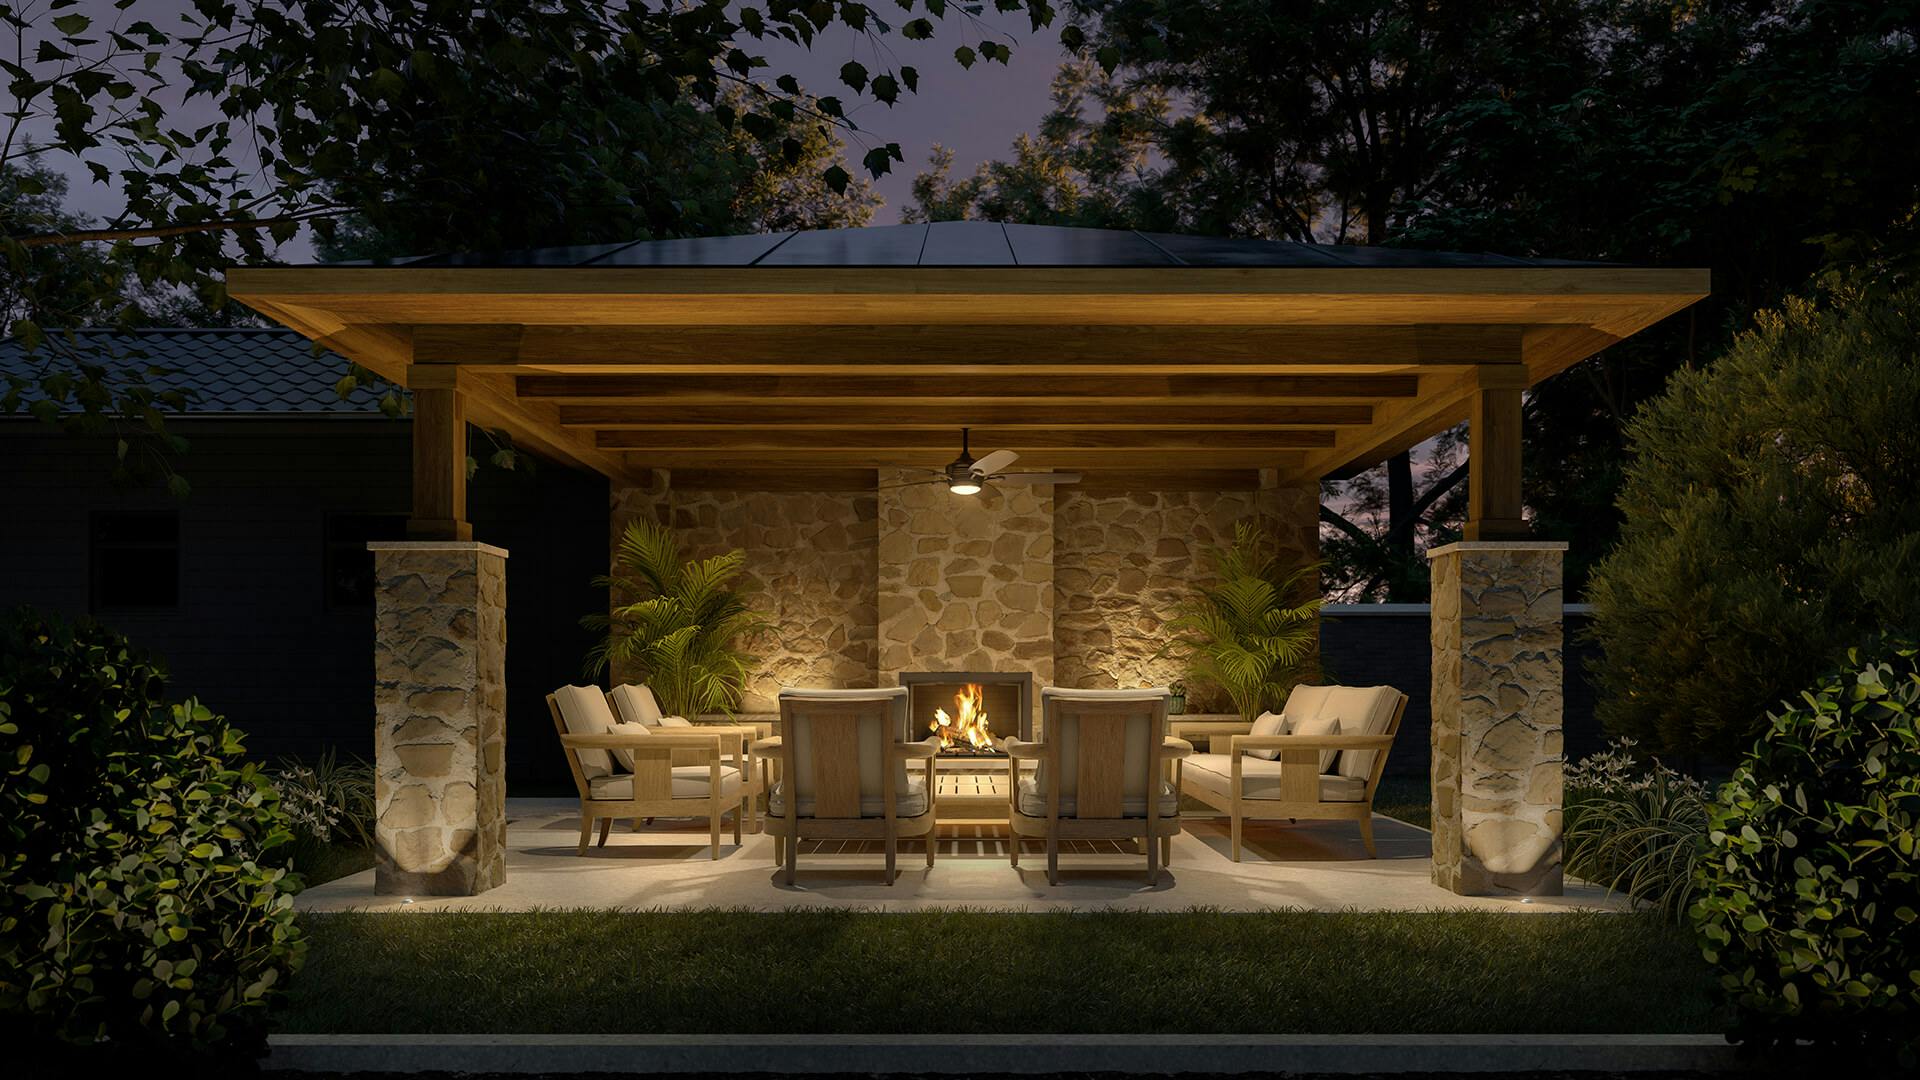 Covered outdoor stone patio with wooden patio furniture and ground lights on at night